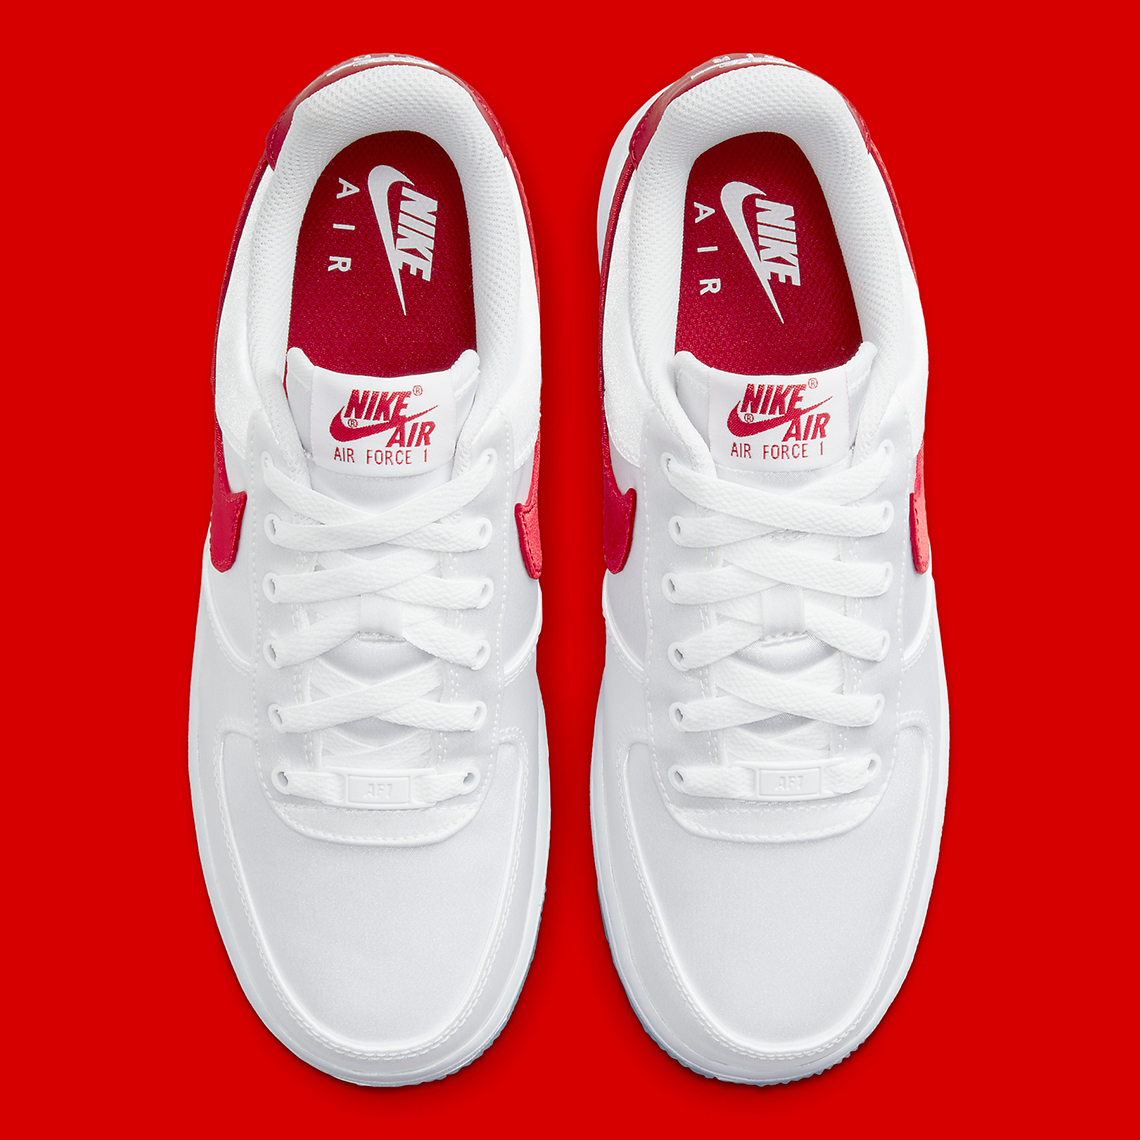 Nike Air Force 1 Low Satin White Red Dx6541 100 1